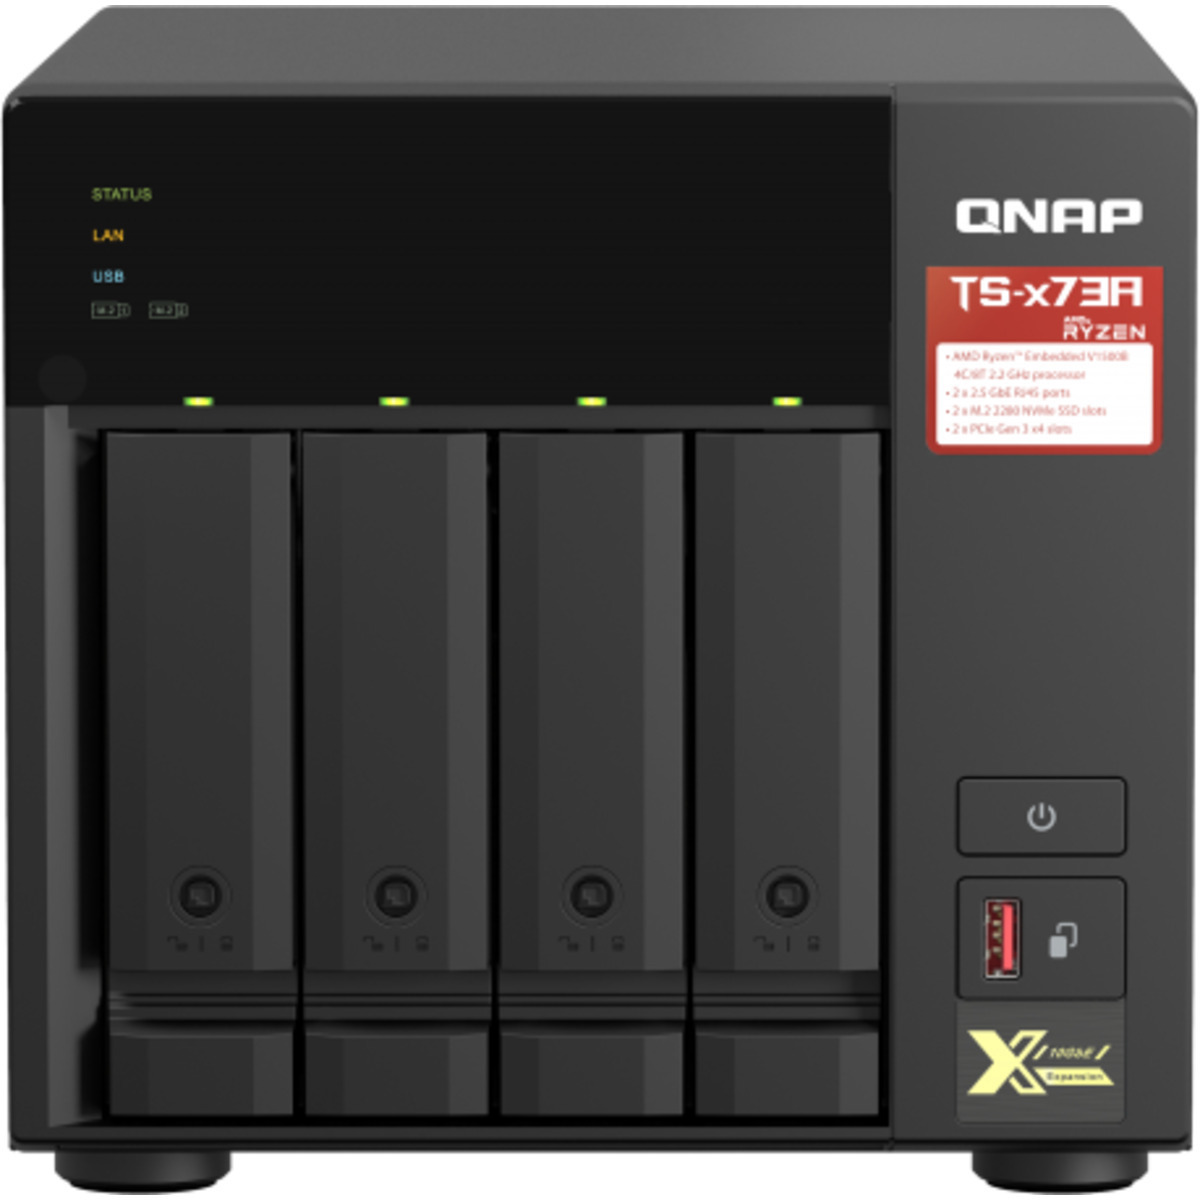 QNAP TS-473A 24tb 4-Bay Desktop Multimedia / Power User / Business NAS - Network Attached Storage Device 3x8tb Seagate IronWolf Pro ST8000NT001 3.5 7200rpm SATA 6Gb/s HDD NAS Class Drives Installed - Burn-In Tested - ON SALE TS-473A